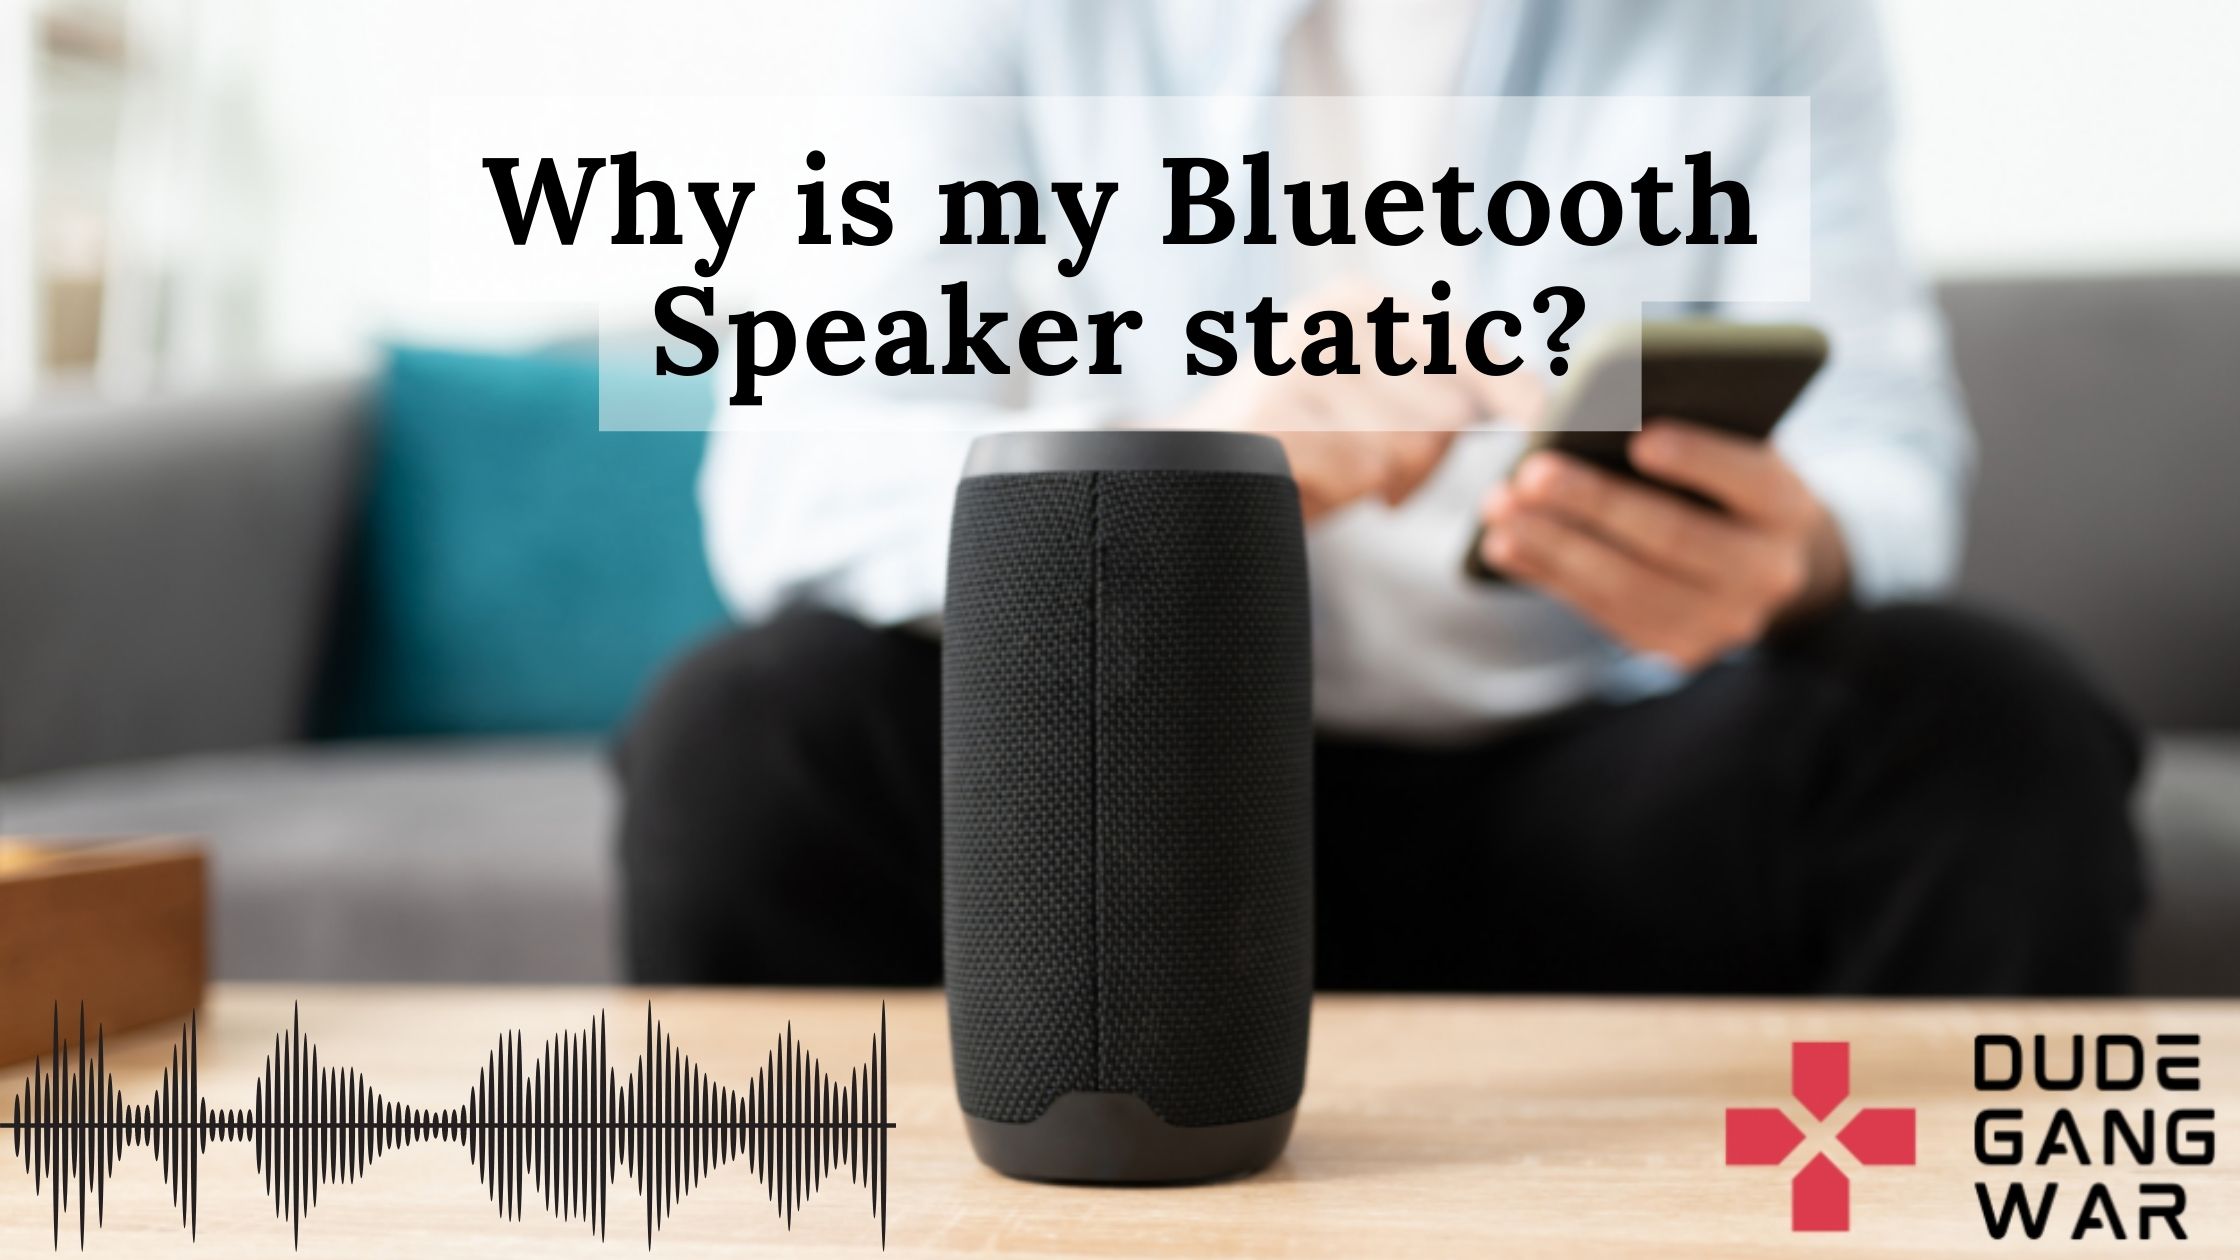 Why is my Bluetooth Speaker static